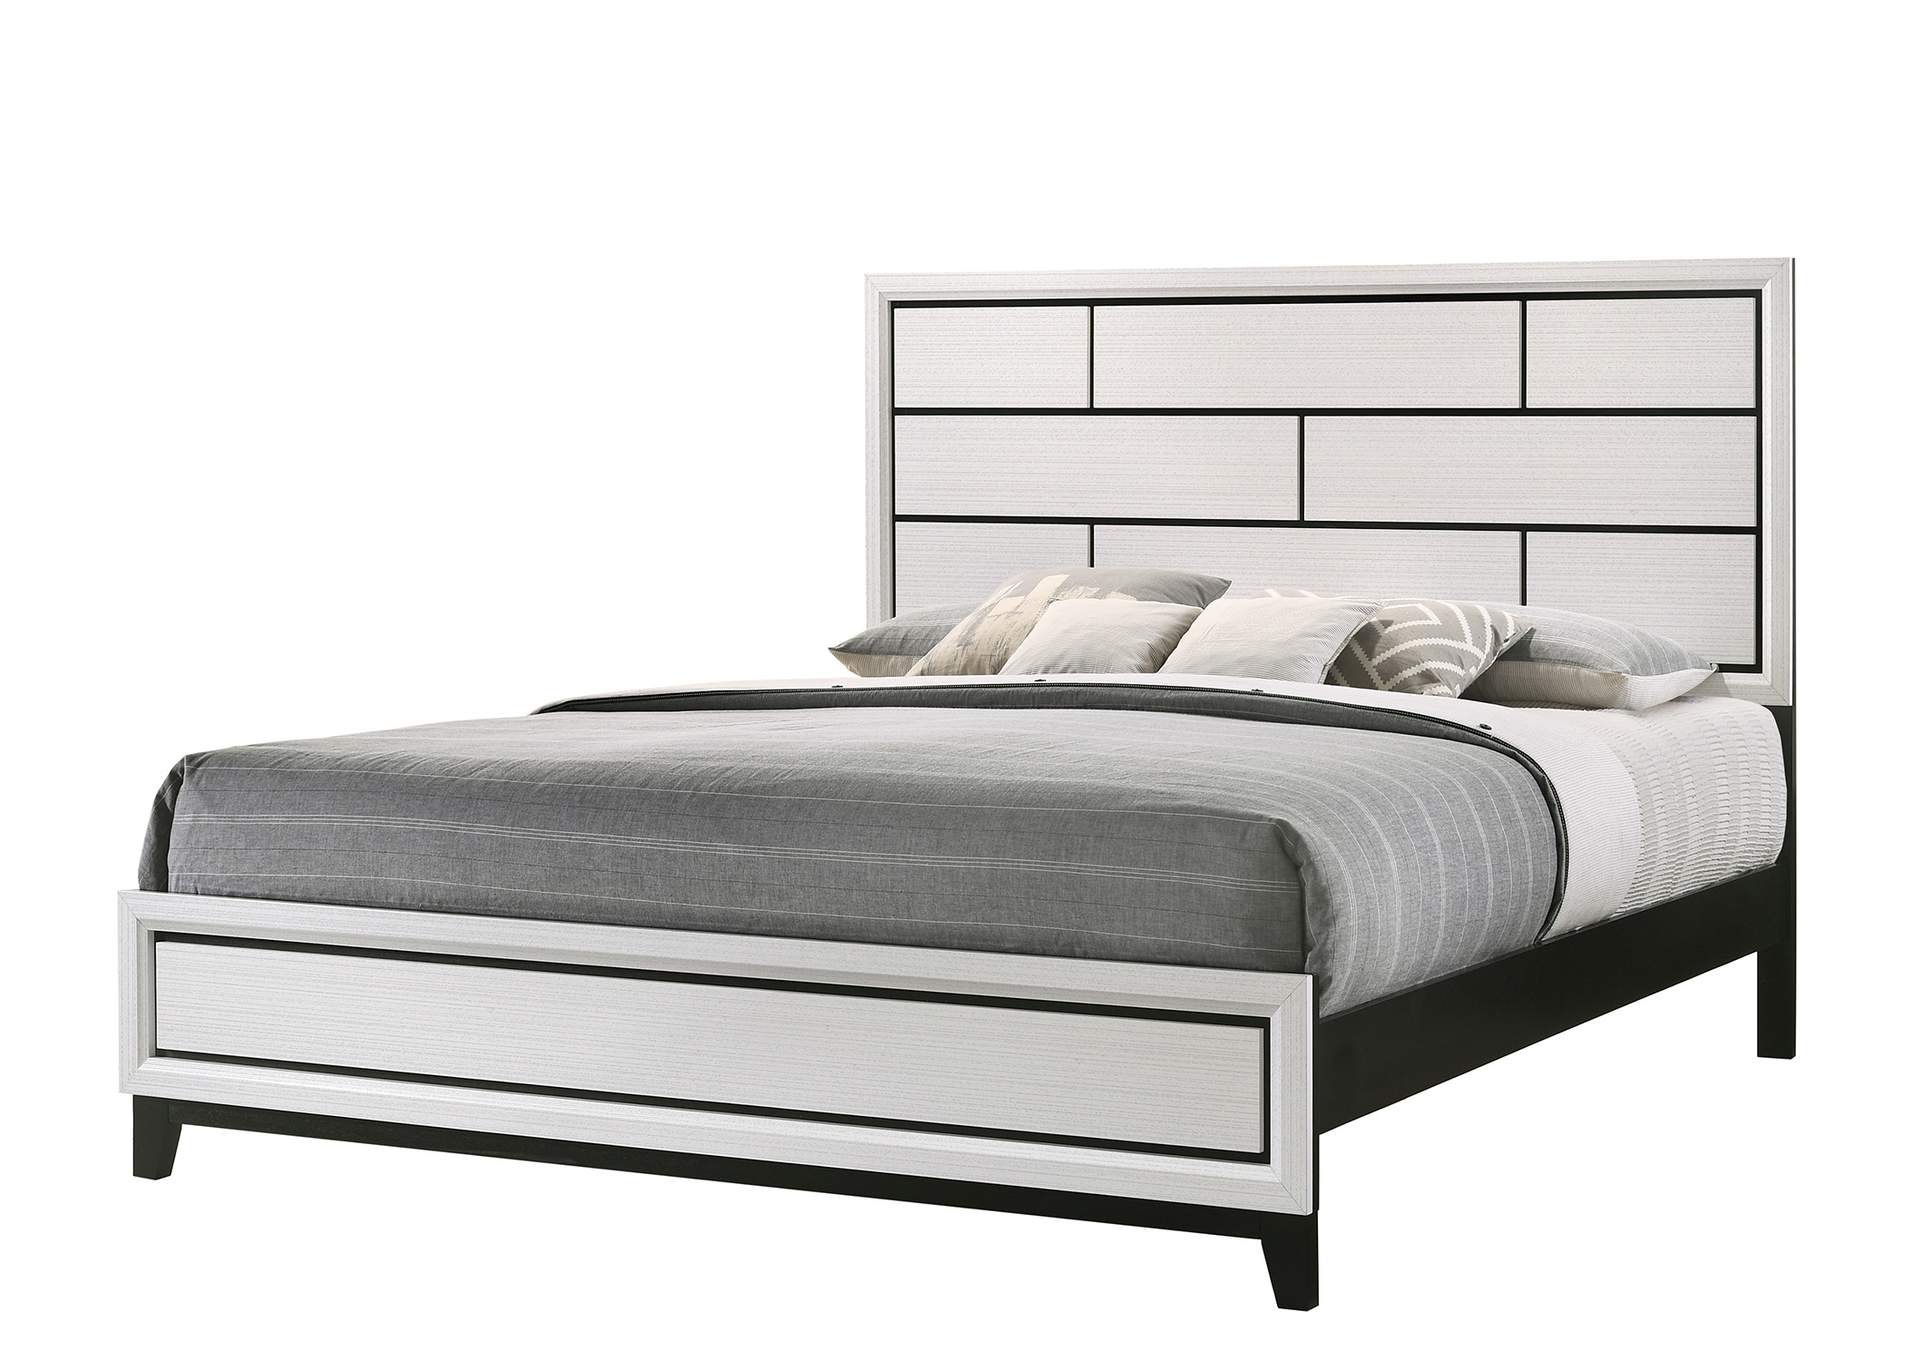 Akerson Chalk King Bed,Crown Mark